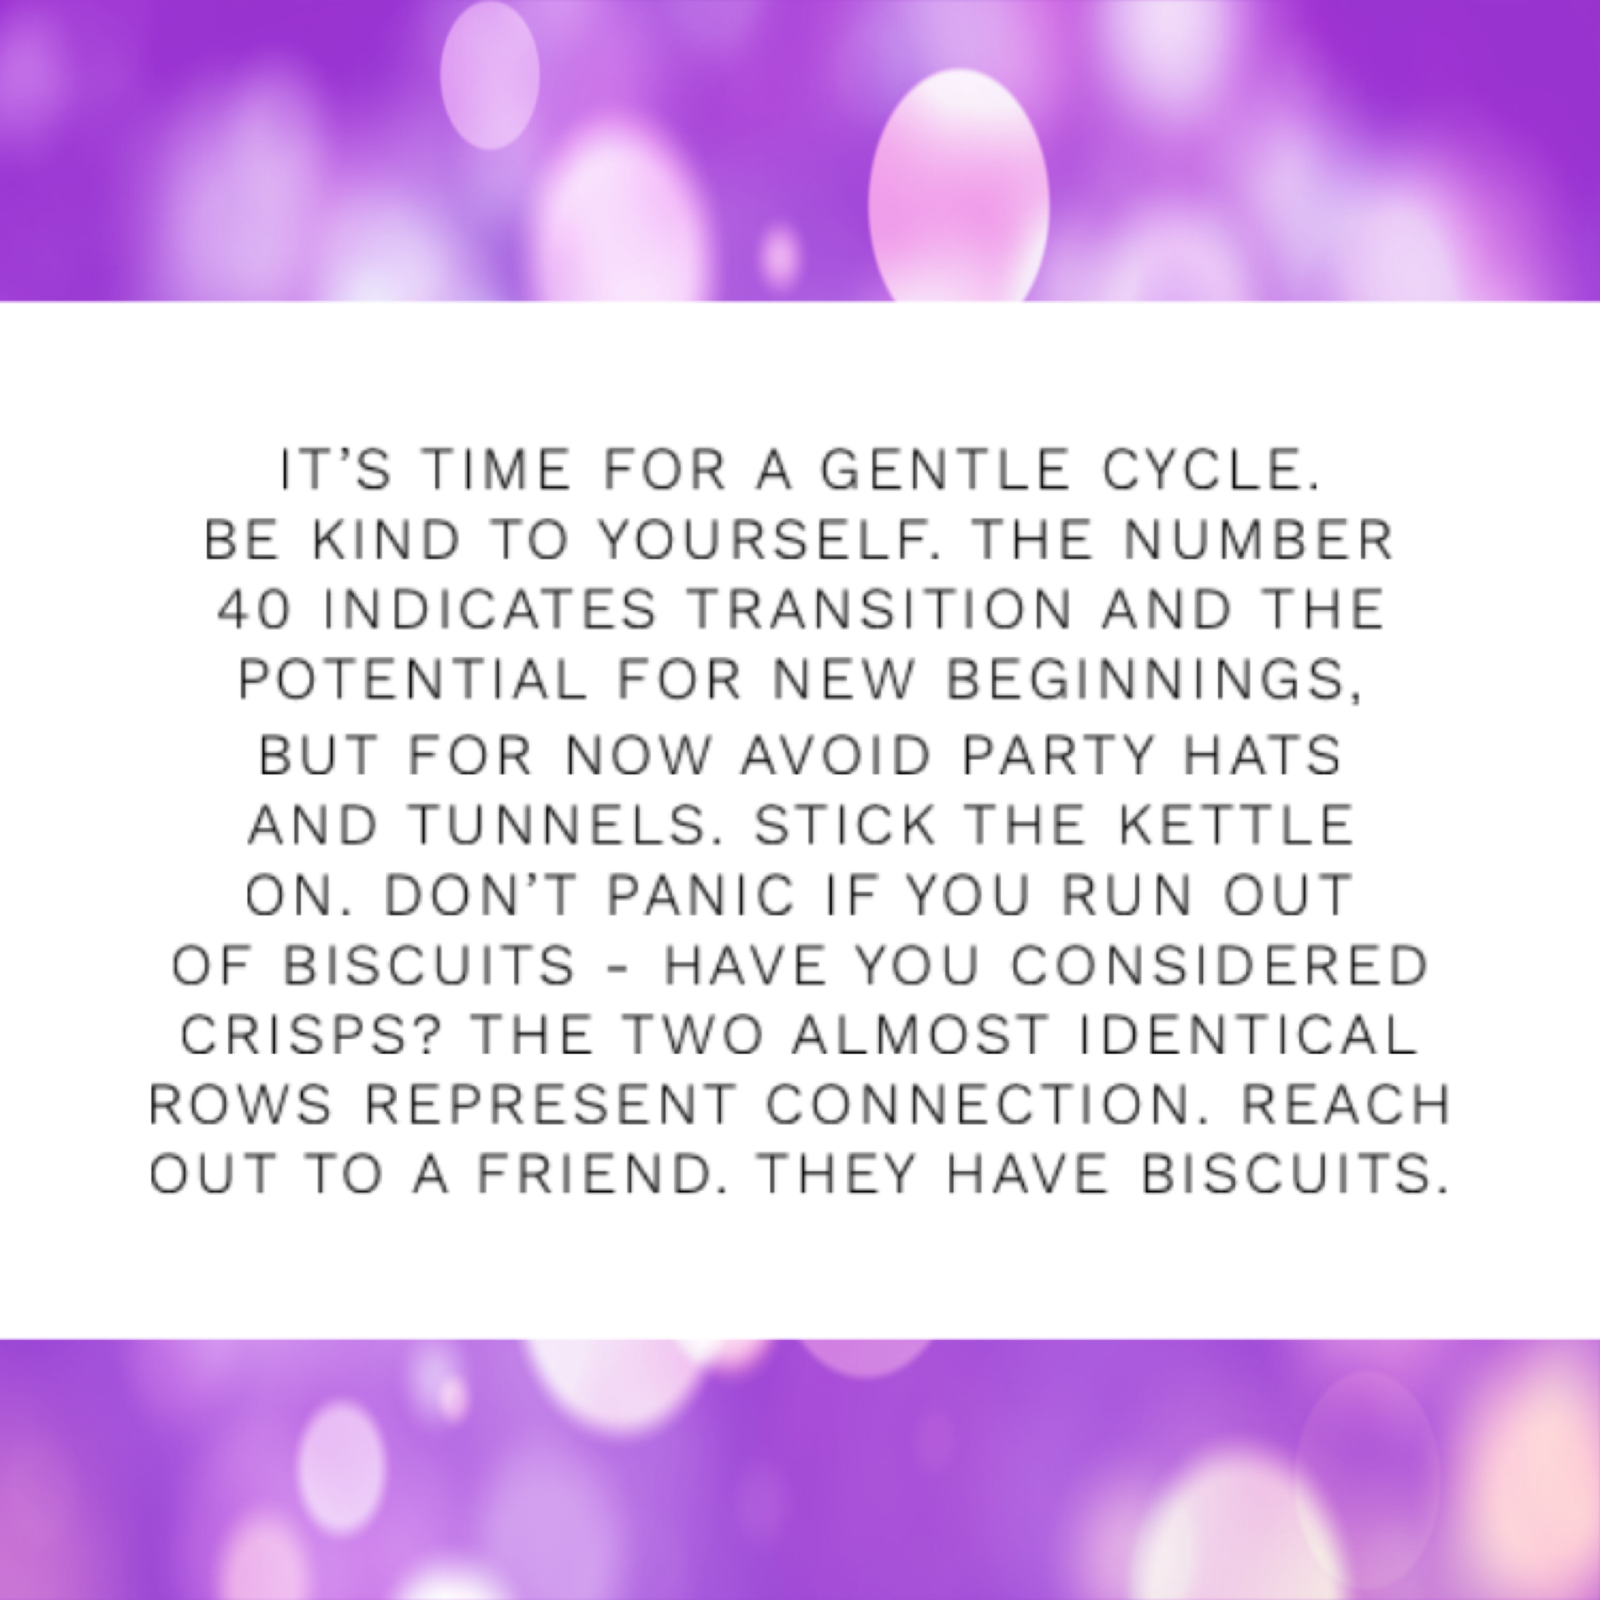 Black text on a white background that reads 'IT'S TIME FOR A GENTLE CYCLE. BE KIND TO YOURSELF. THE NUMBER 40 INDICATES TRANSITION AND THE POTENTIAL FOR NEW BEGINNINGS, BUT FOR NOW AVOID PARTY HATS AND TUNNELS. STICK THE KETTLE ON. DON'T PANIC IF YOU RUN OUT OF BISCUITS - HAVE YOU CONSIDERED CRISPS? THE TWO ALMOST IDENTICAL ROWS REPRESENT CONNECTION. REACH OUT TO A FRIEND. THEY HAVE BISCUITS.' on a purple glittery backdrop.